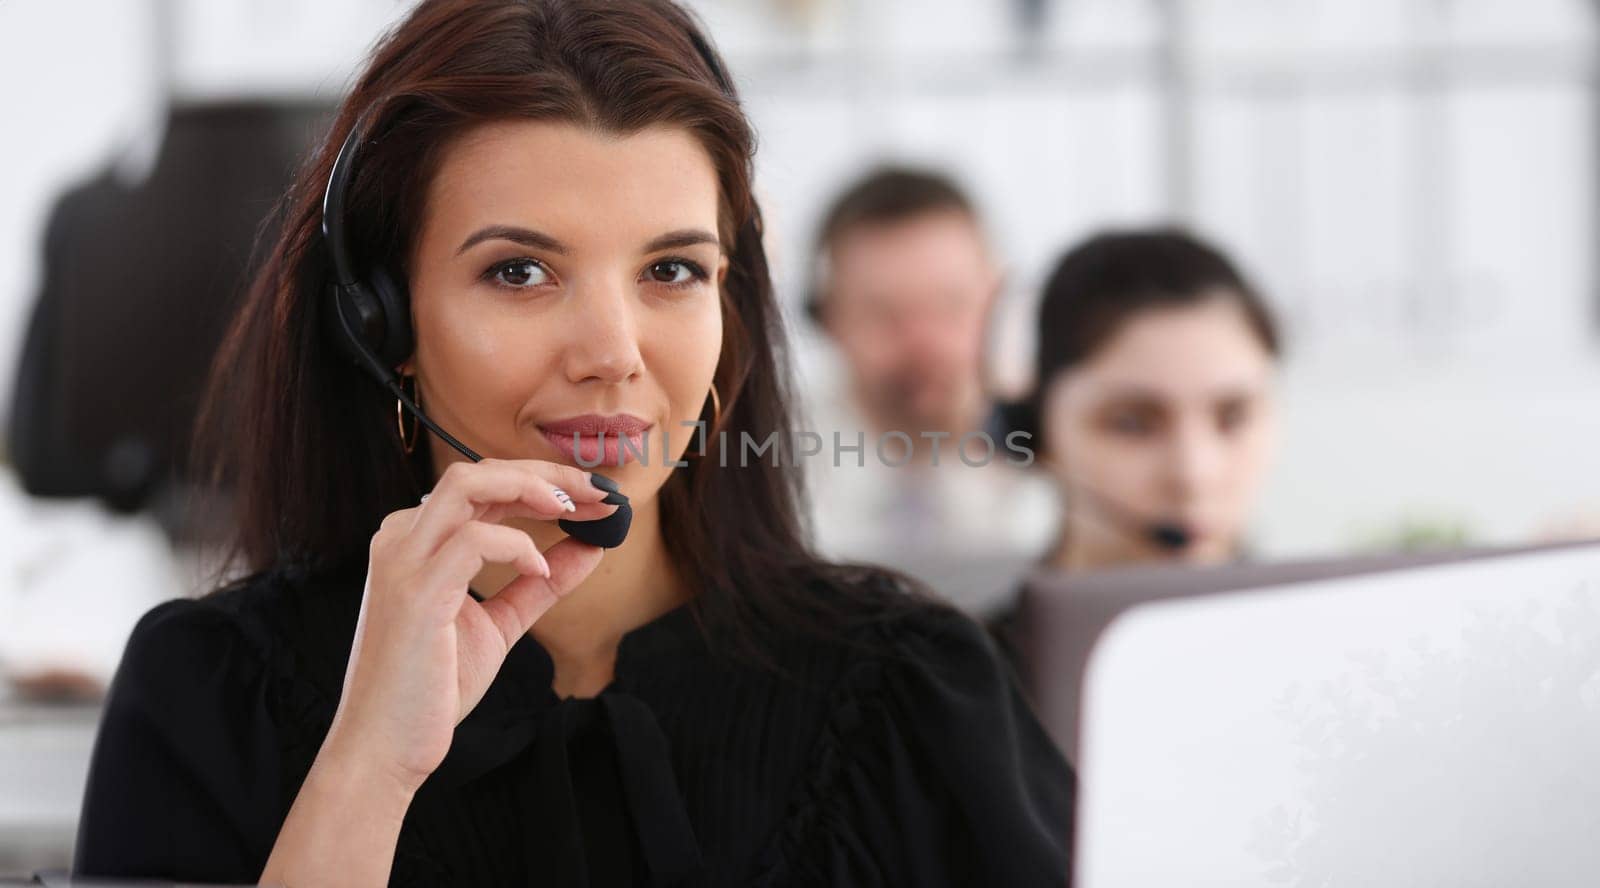 Three call centre service operators at work by kuprevich